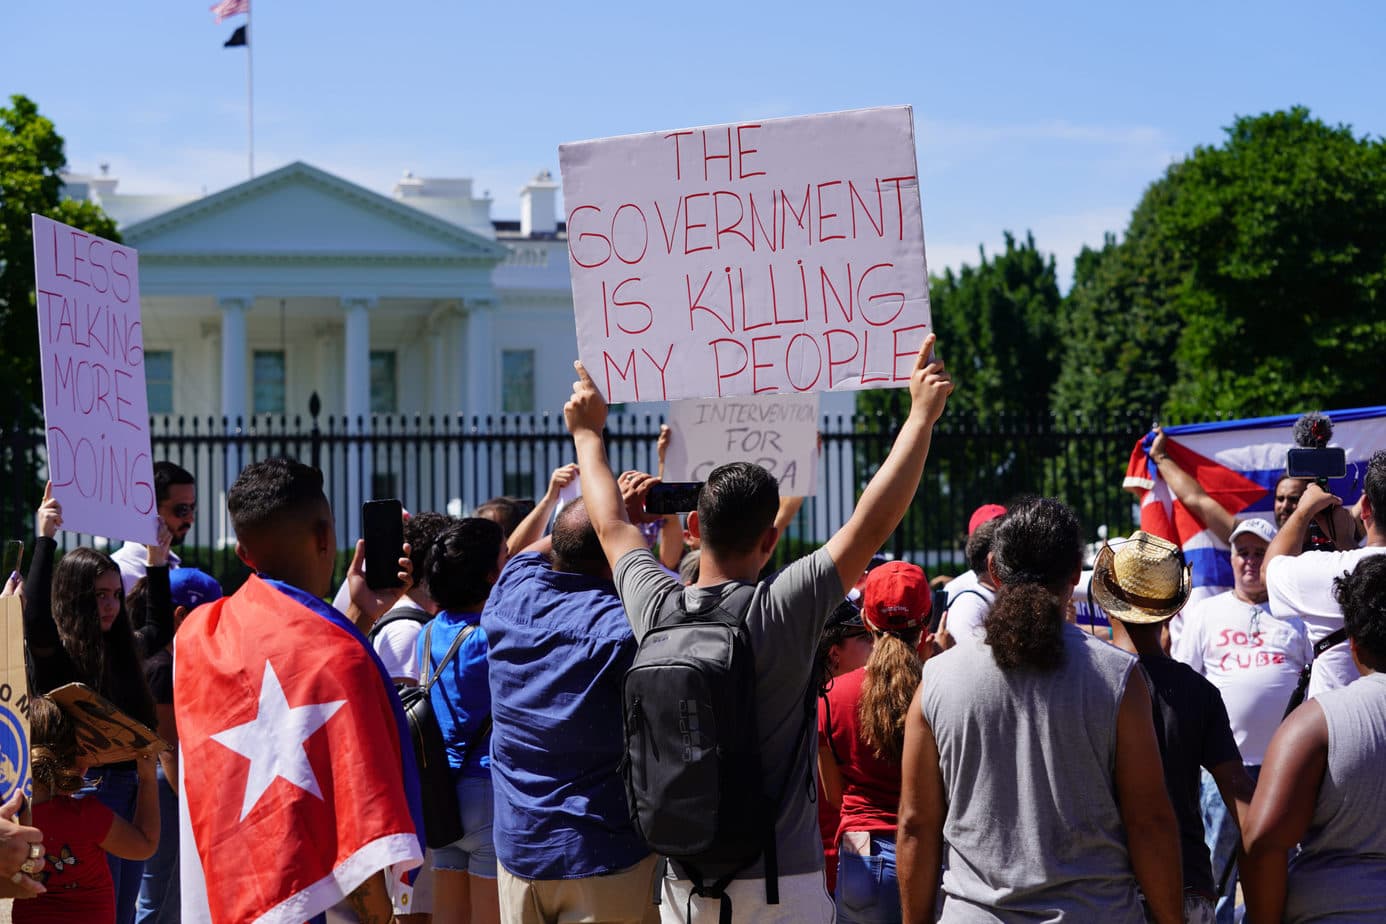 cuban-americans-demonstrate-for-intervention